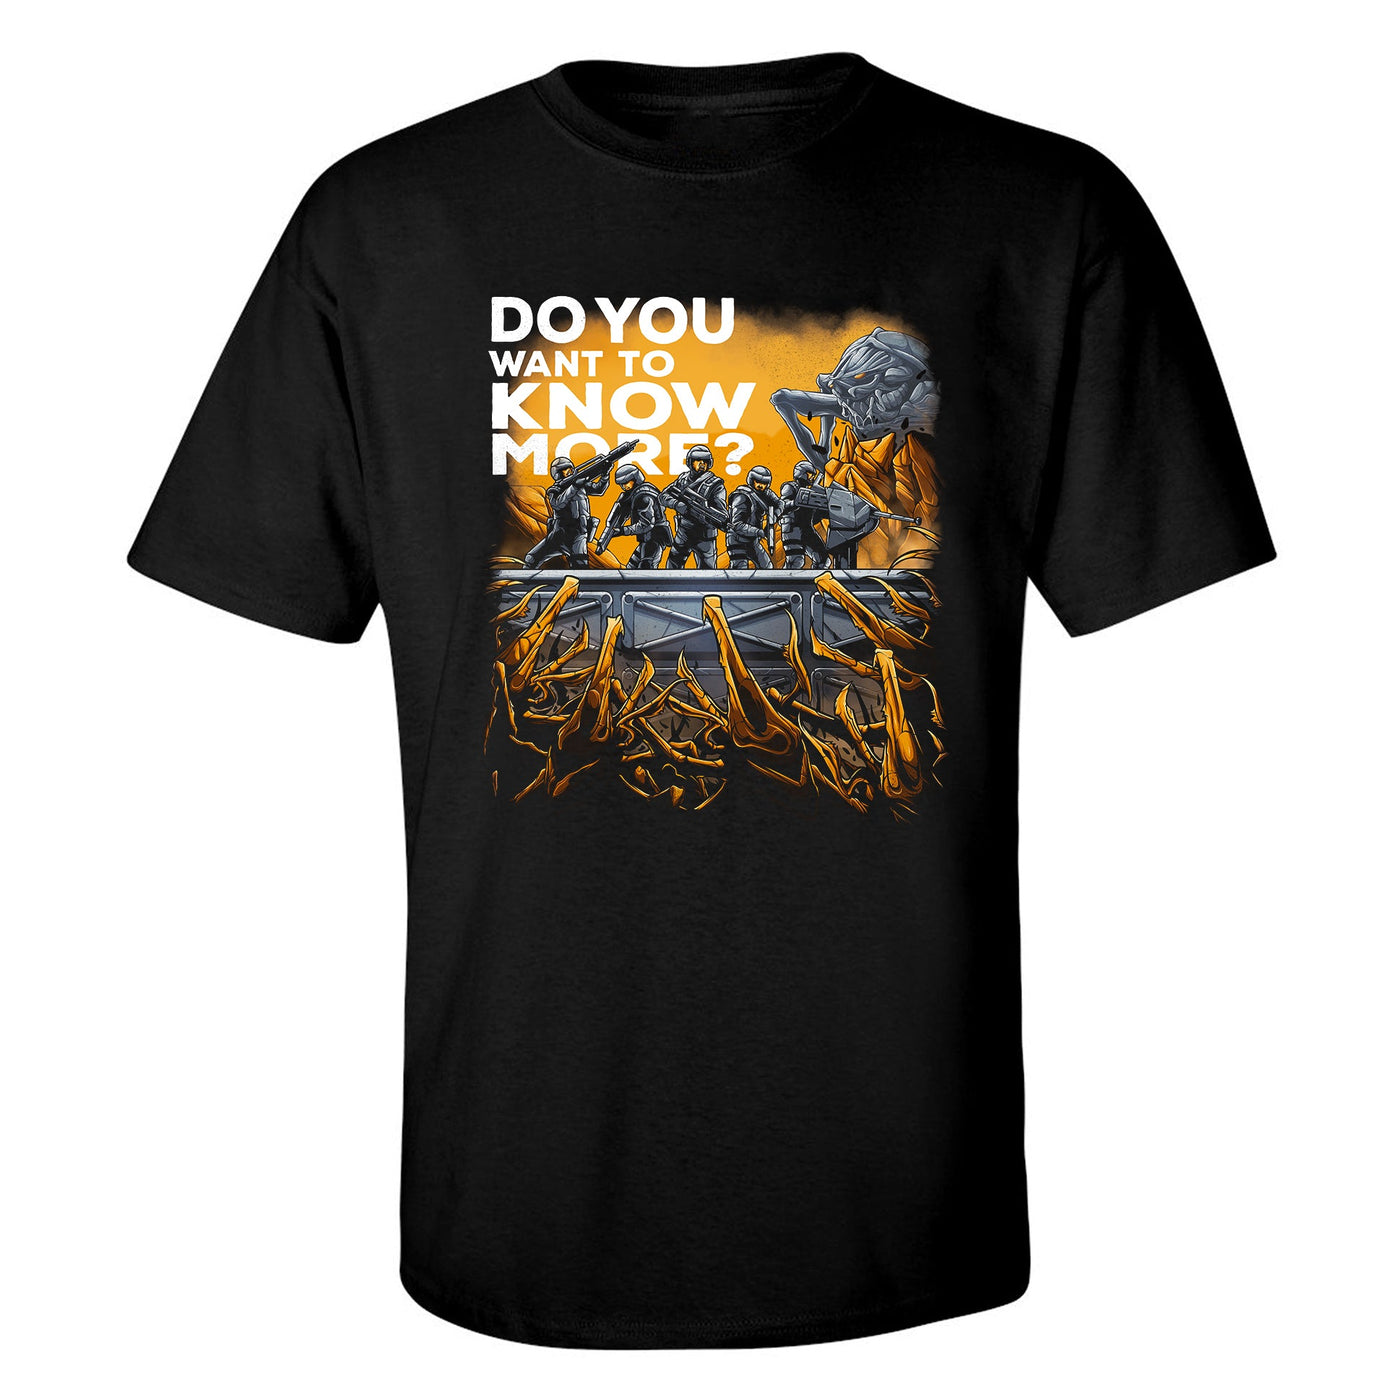 SPECIAL "Do You Want to Know More" Short Sleeve T-Shirt by Rodrigo Tannus